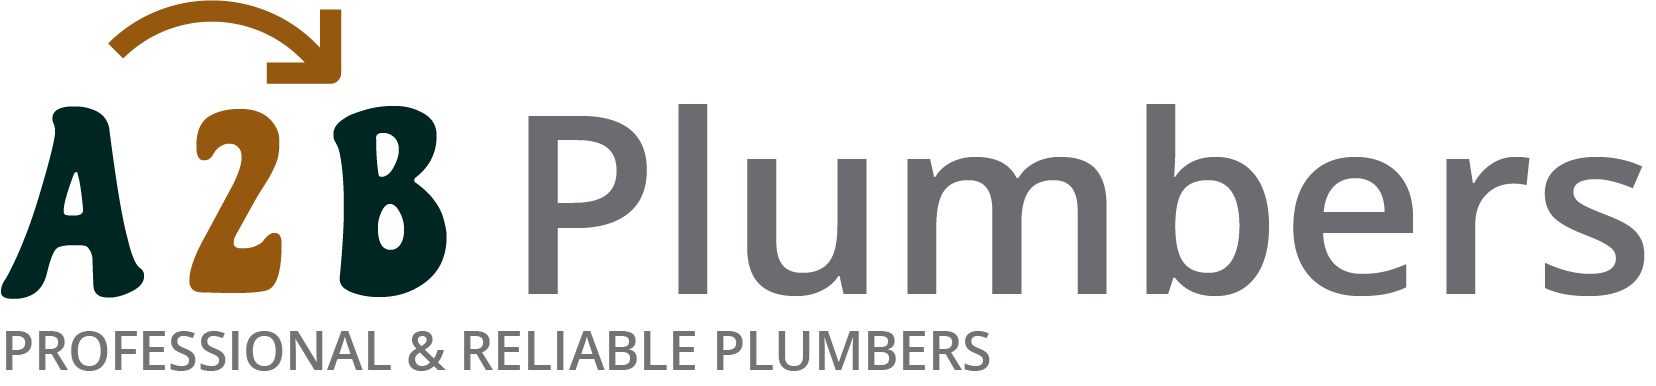 If you need a boiler installed, a radiator repaired or a leaking tap fixed, call us now - we provide services for properties in Oundle and the local area.